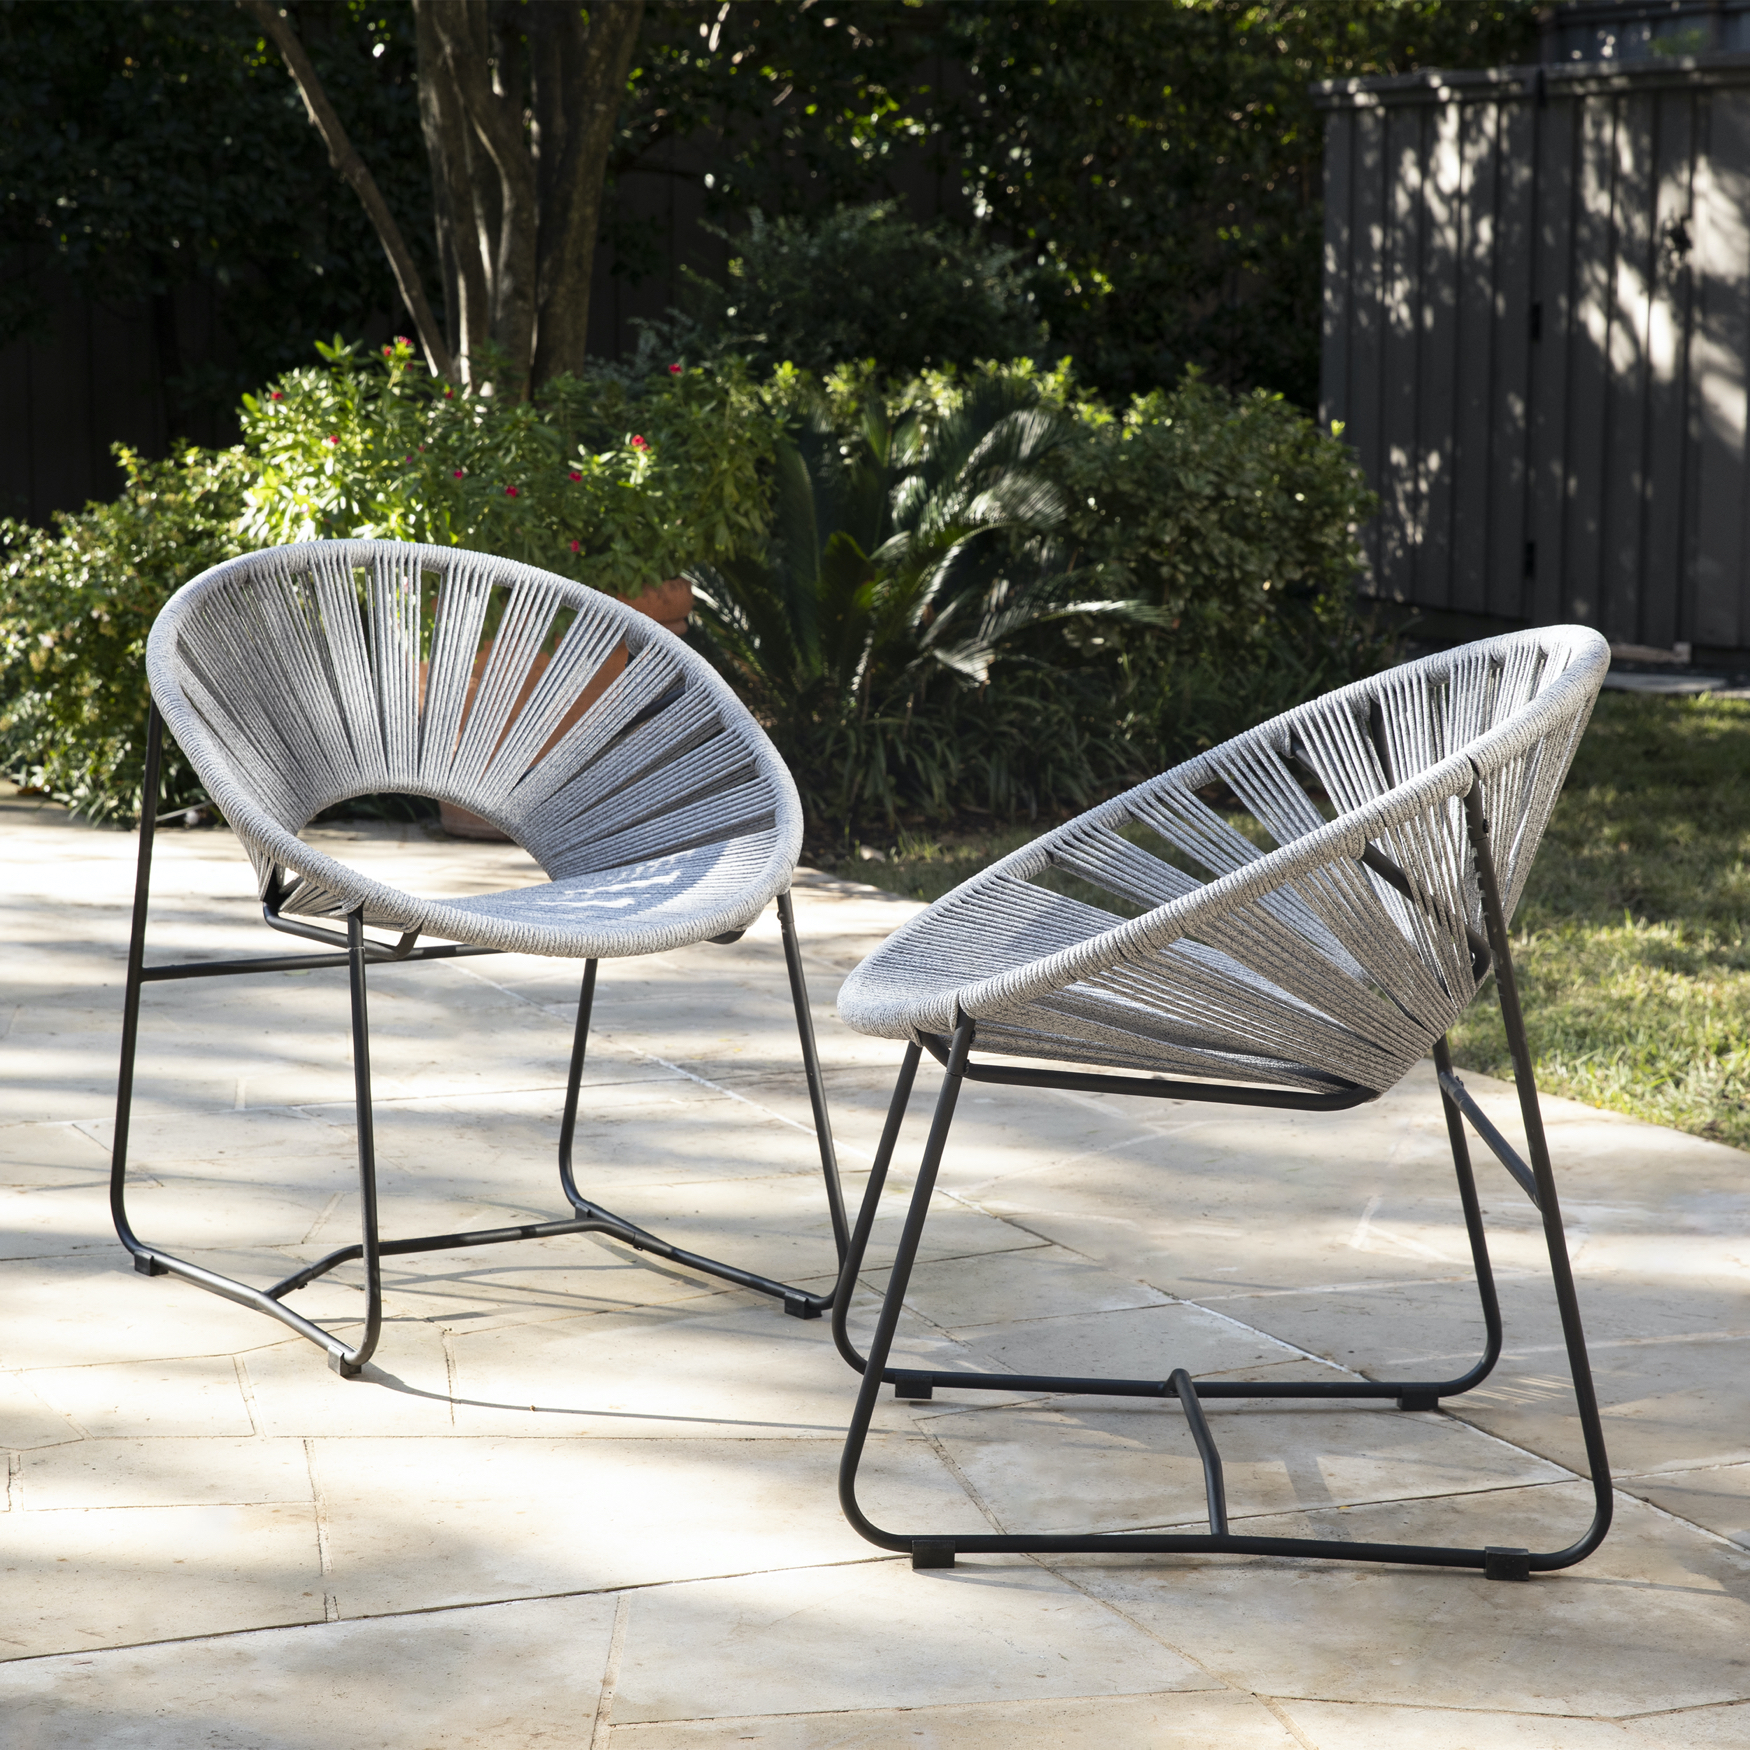 Rondly Outdoor Rope Chairs – 2pc Set, GRAY